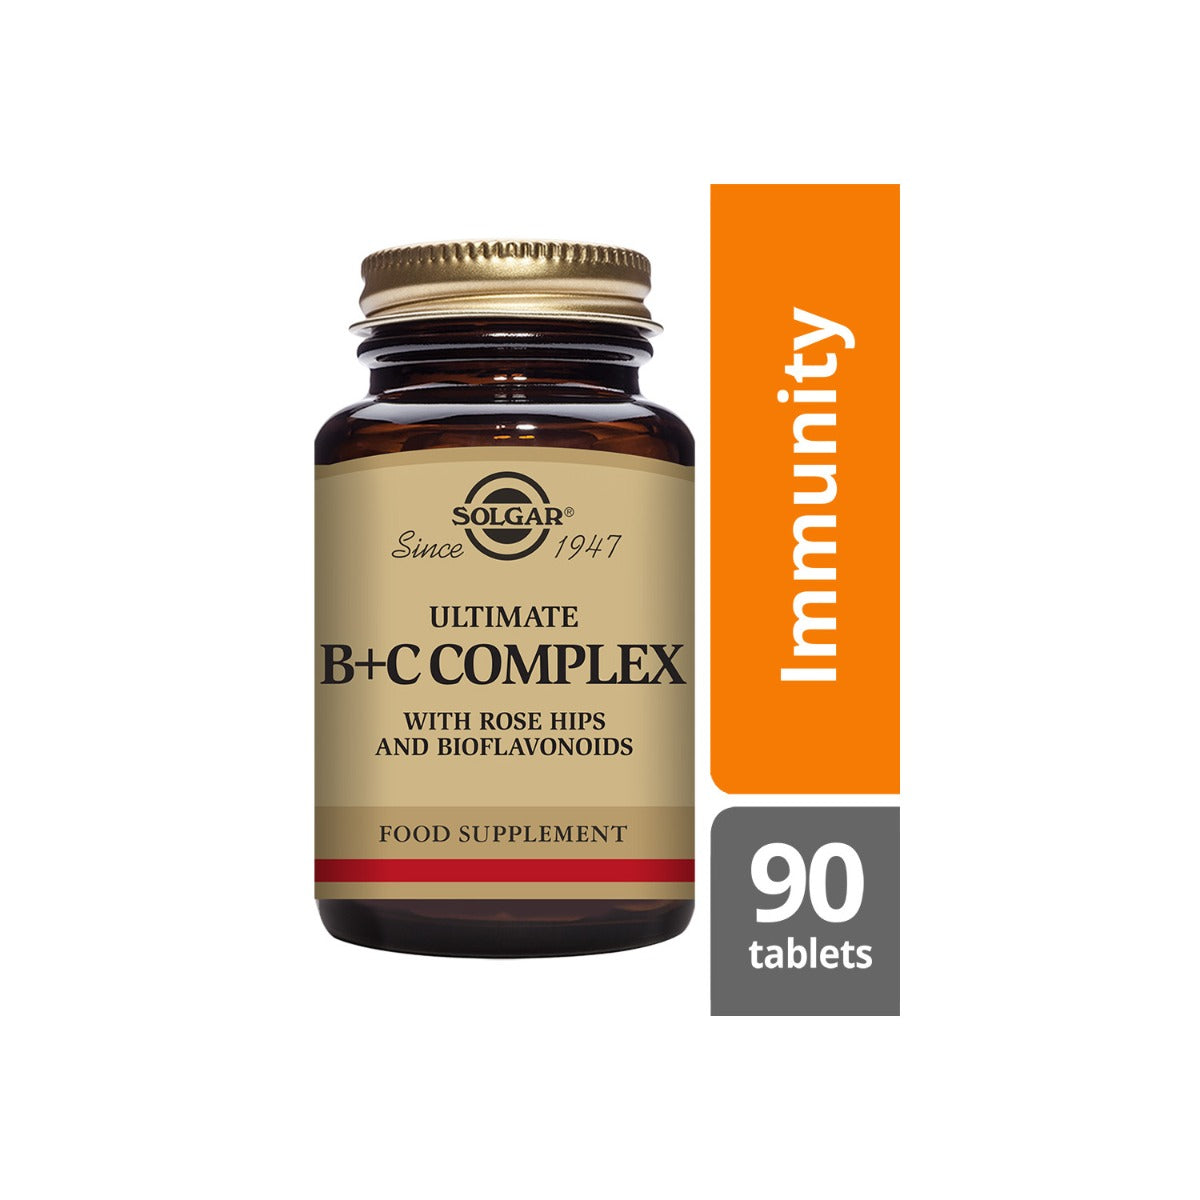 Solgar® Ultimate B+C Complex Tablets - Pack of 90